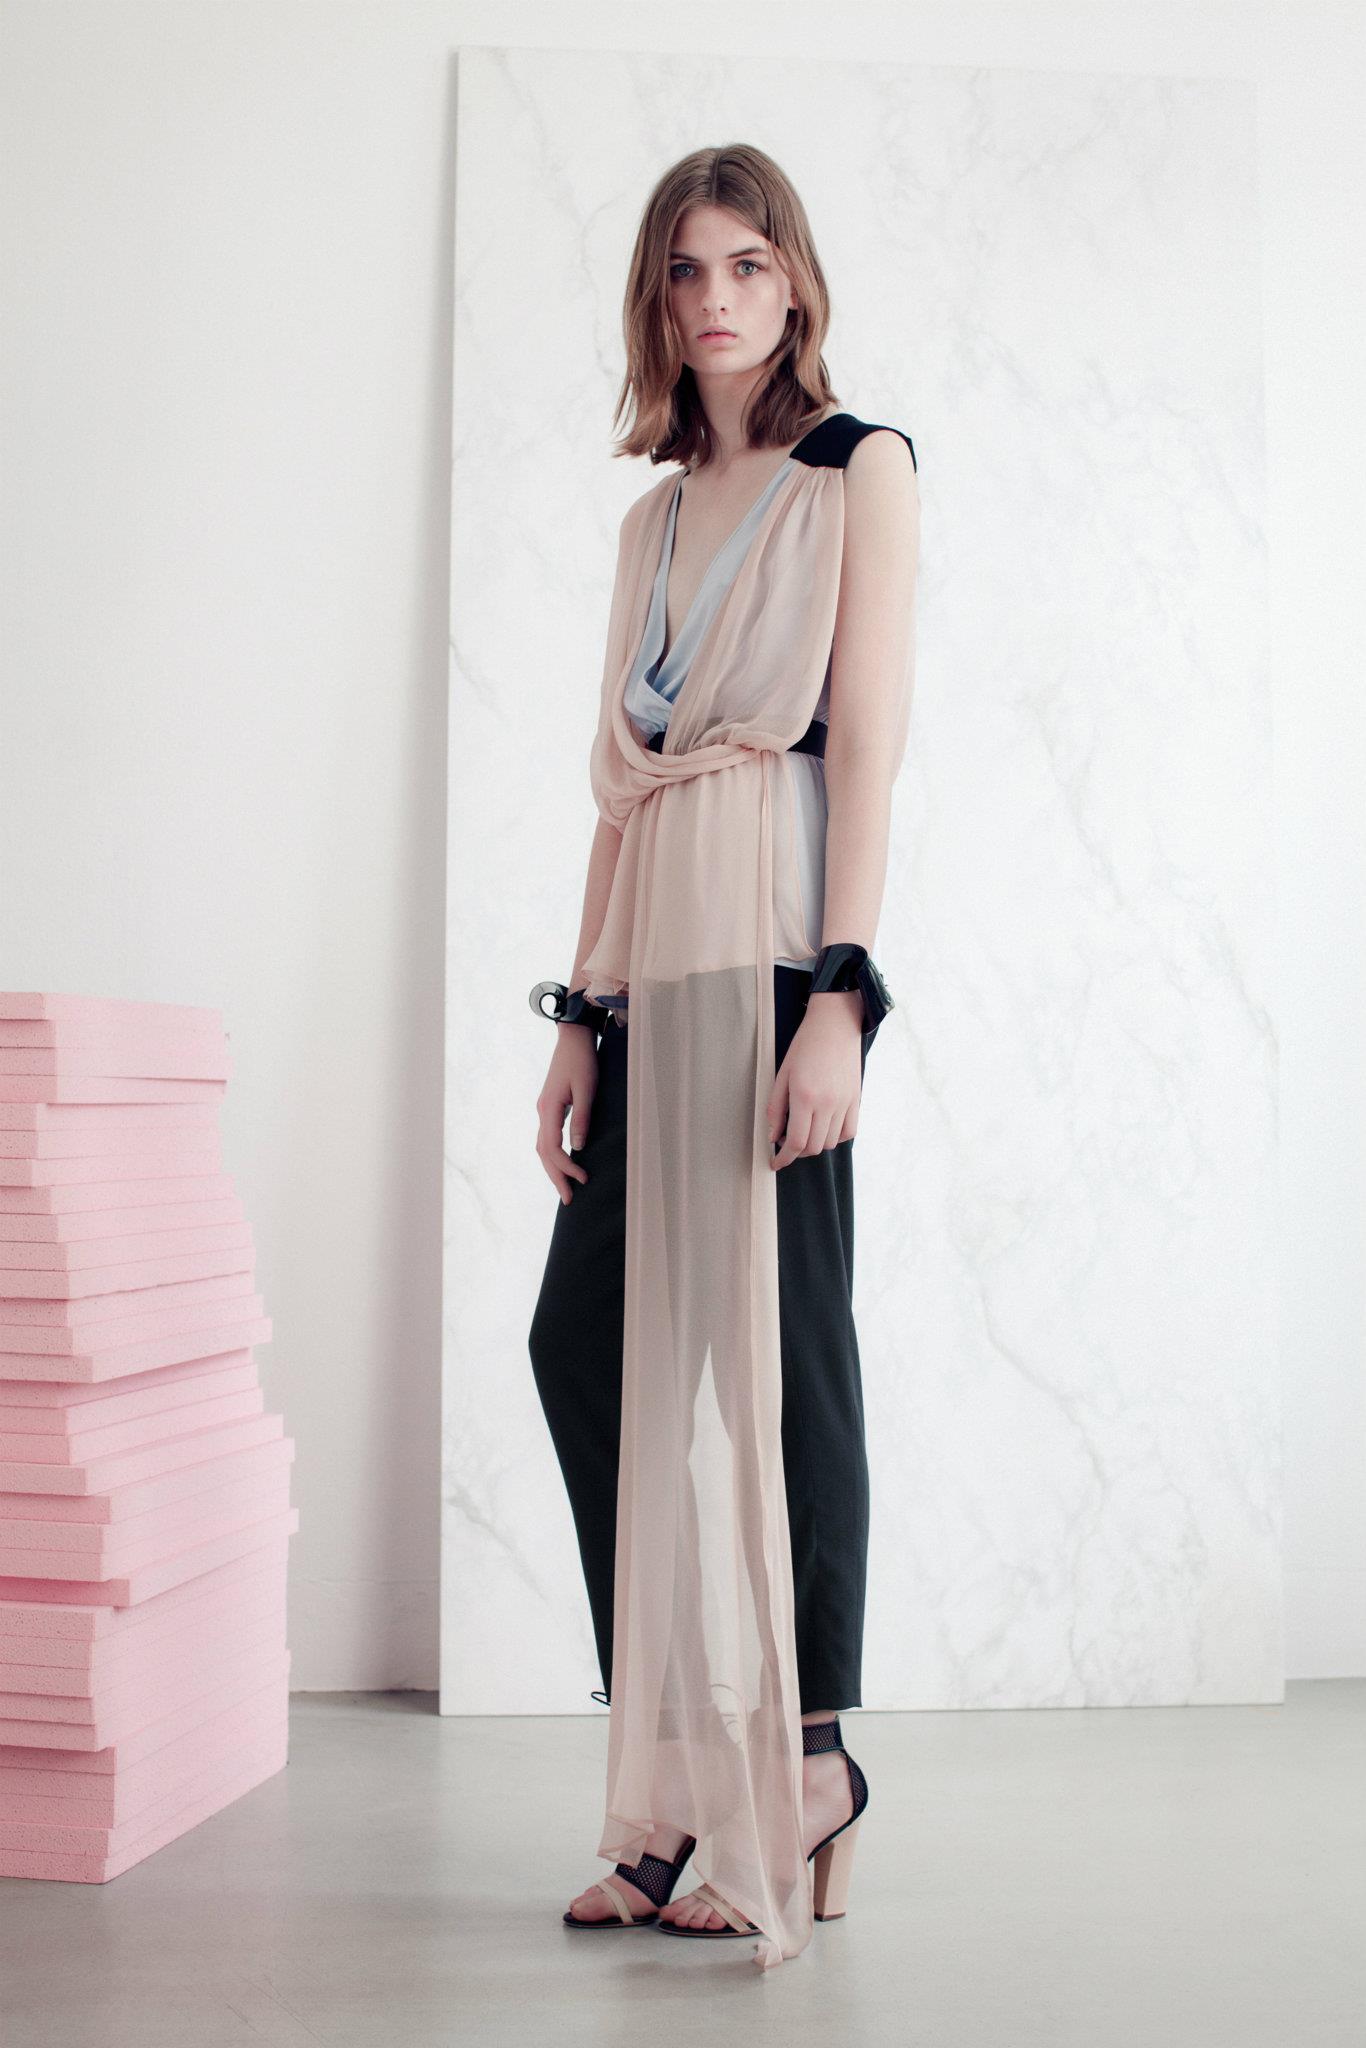 Vionnet Spring 2013 Collection 26